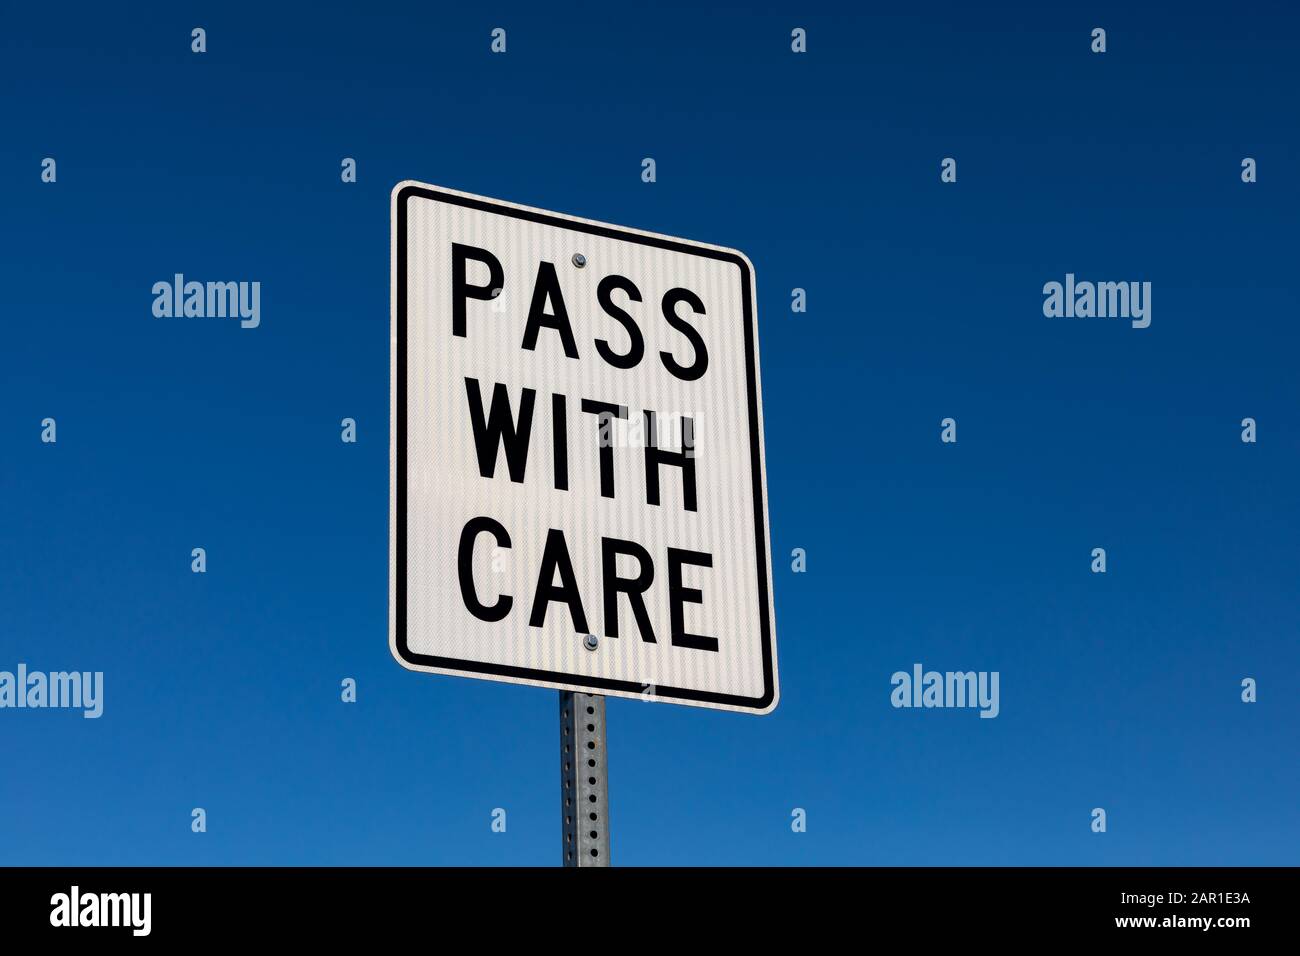 Closeup angled view of pass with care reflective street sign. Isolated on deep blue sky background Stock Photo